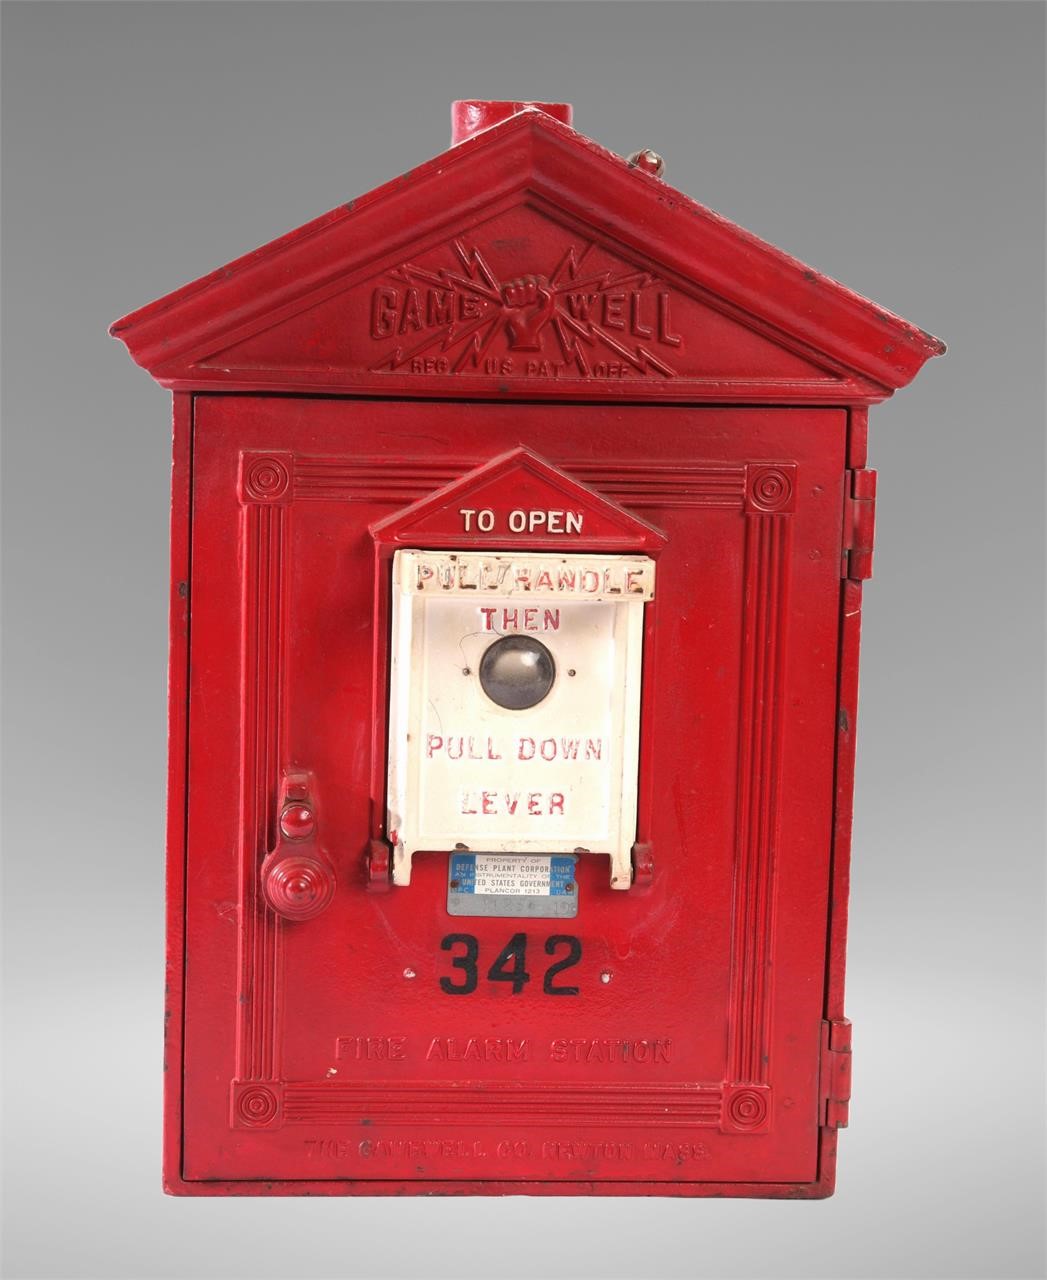 GAMEWELL CAST IRON VINTAGE FIRE ALARM STATION BOX